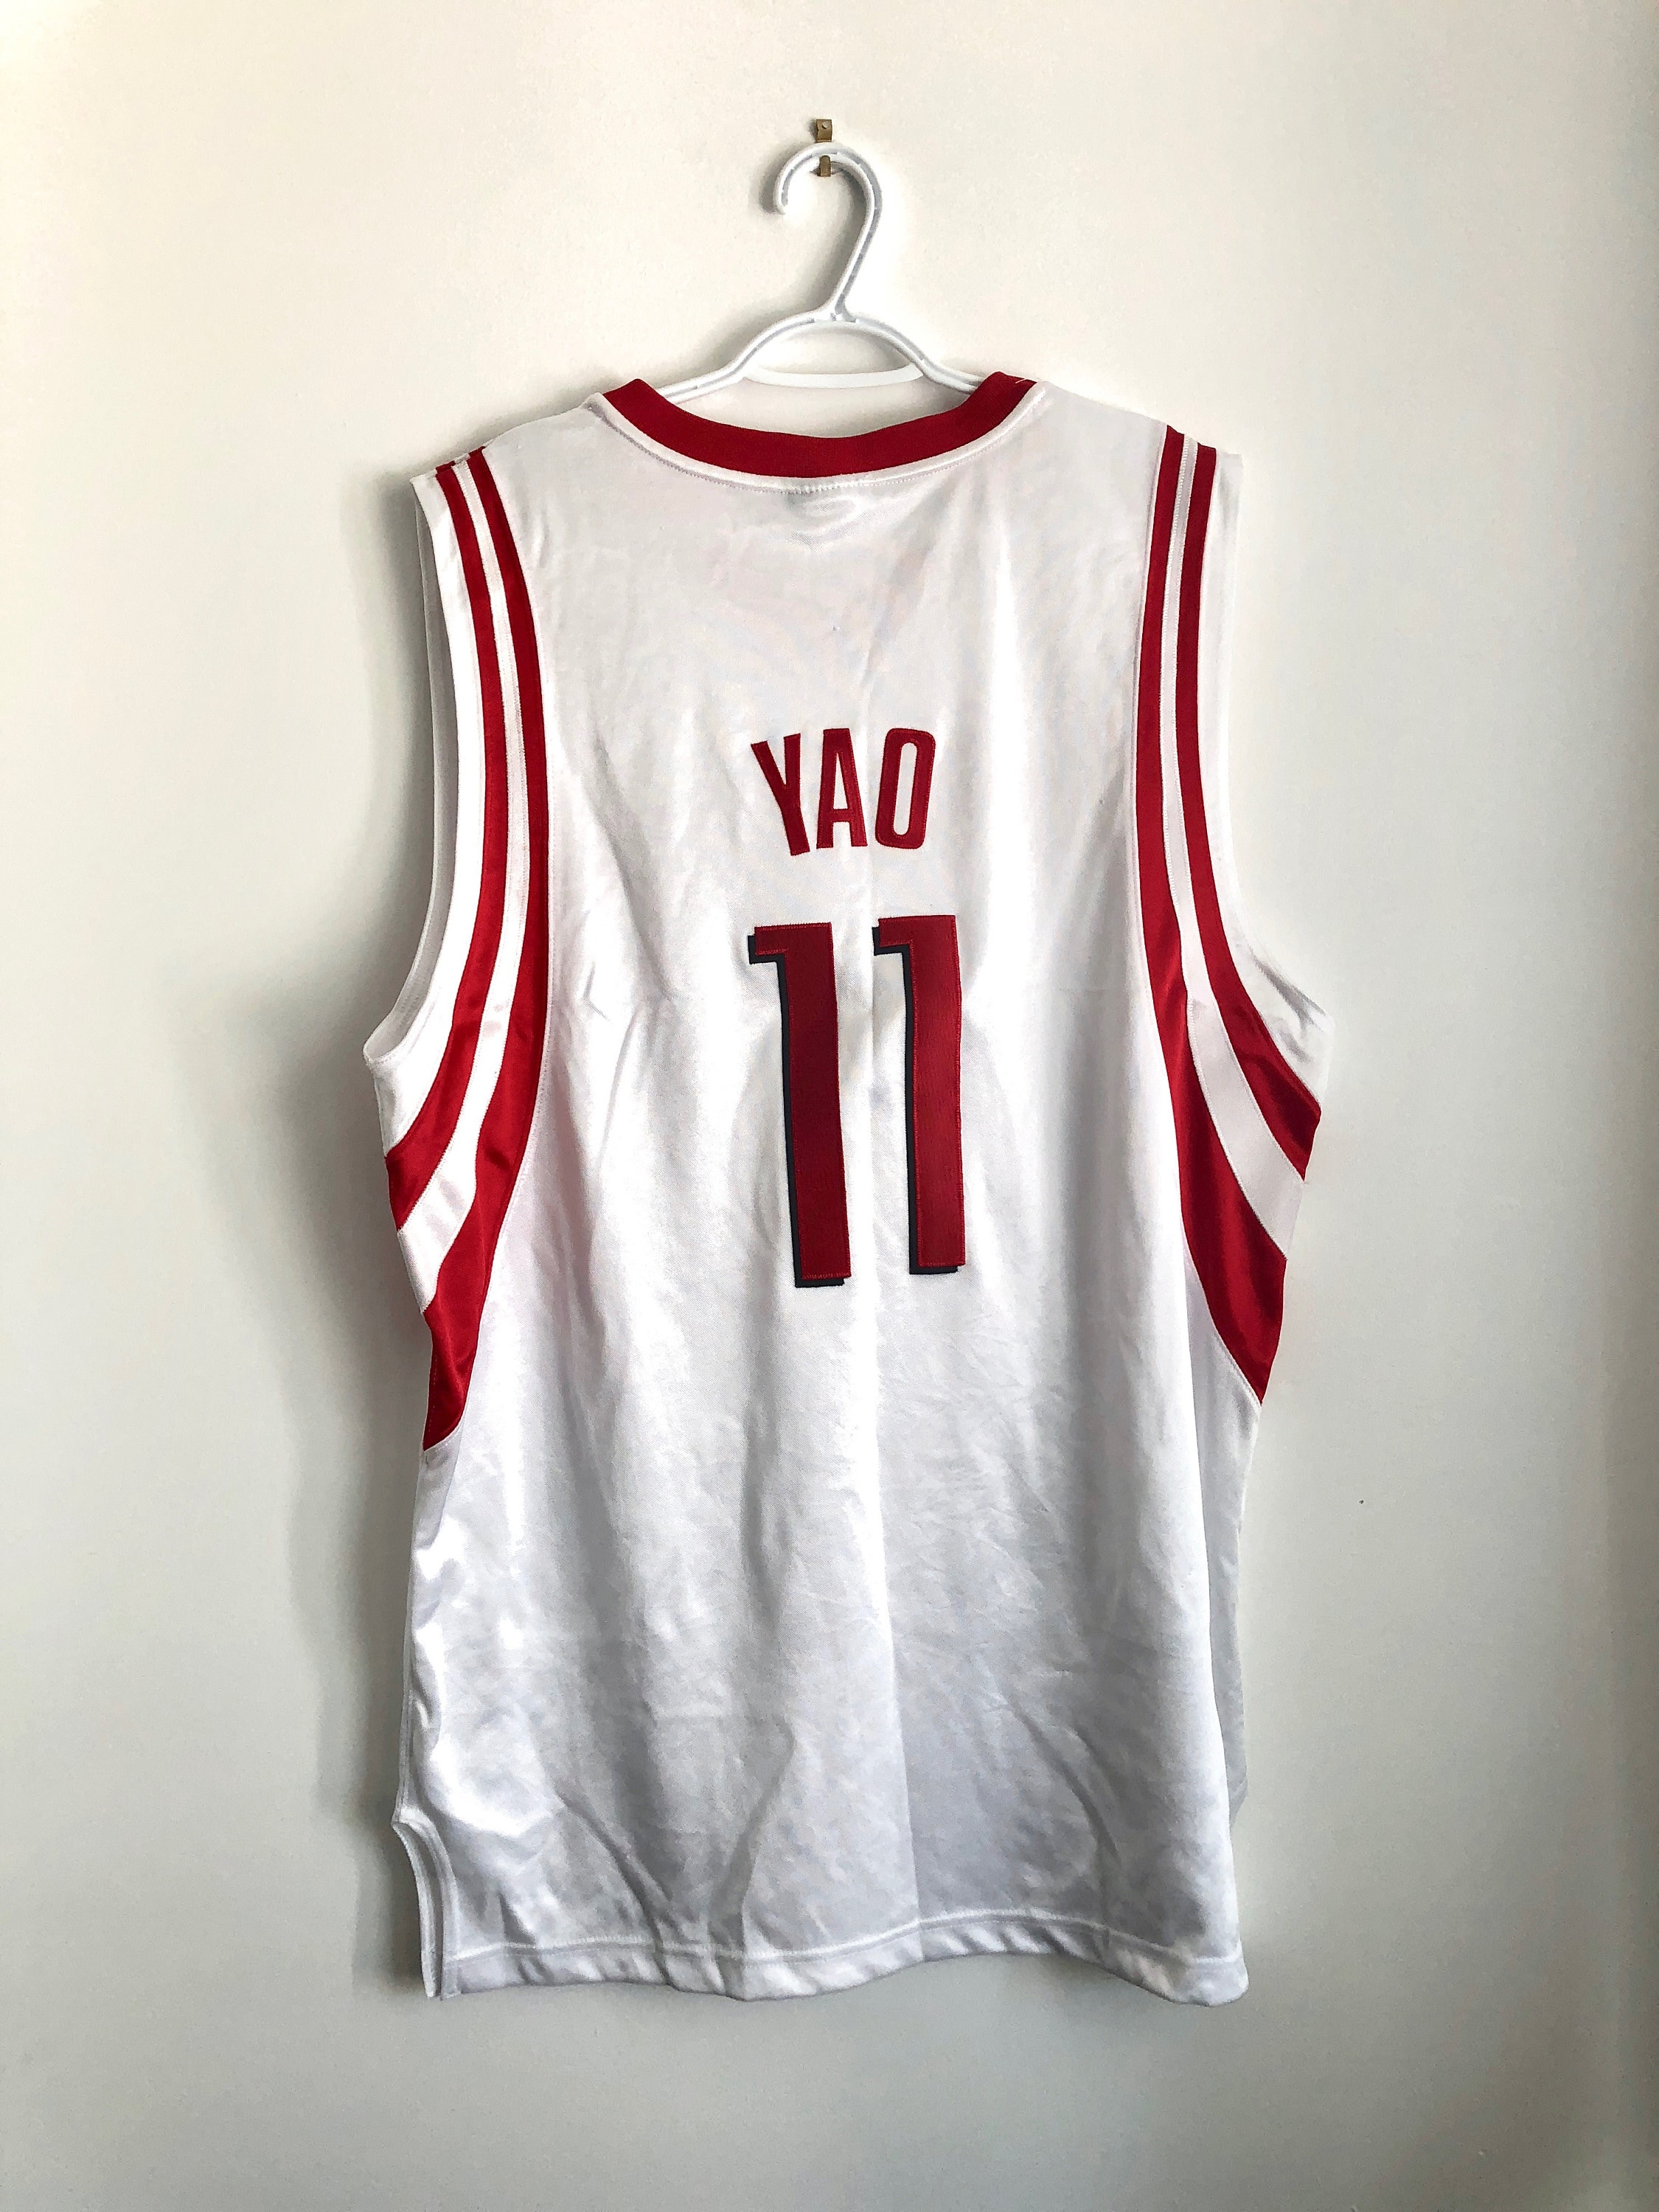 Yao Ming 姚明 Signed Rockets Reebok Authentic Jersey White (BAS) 52, NWT